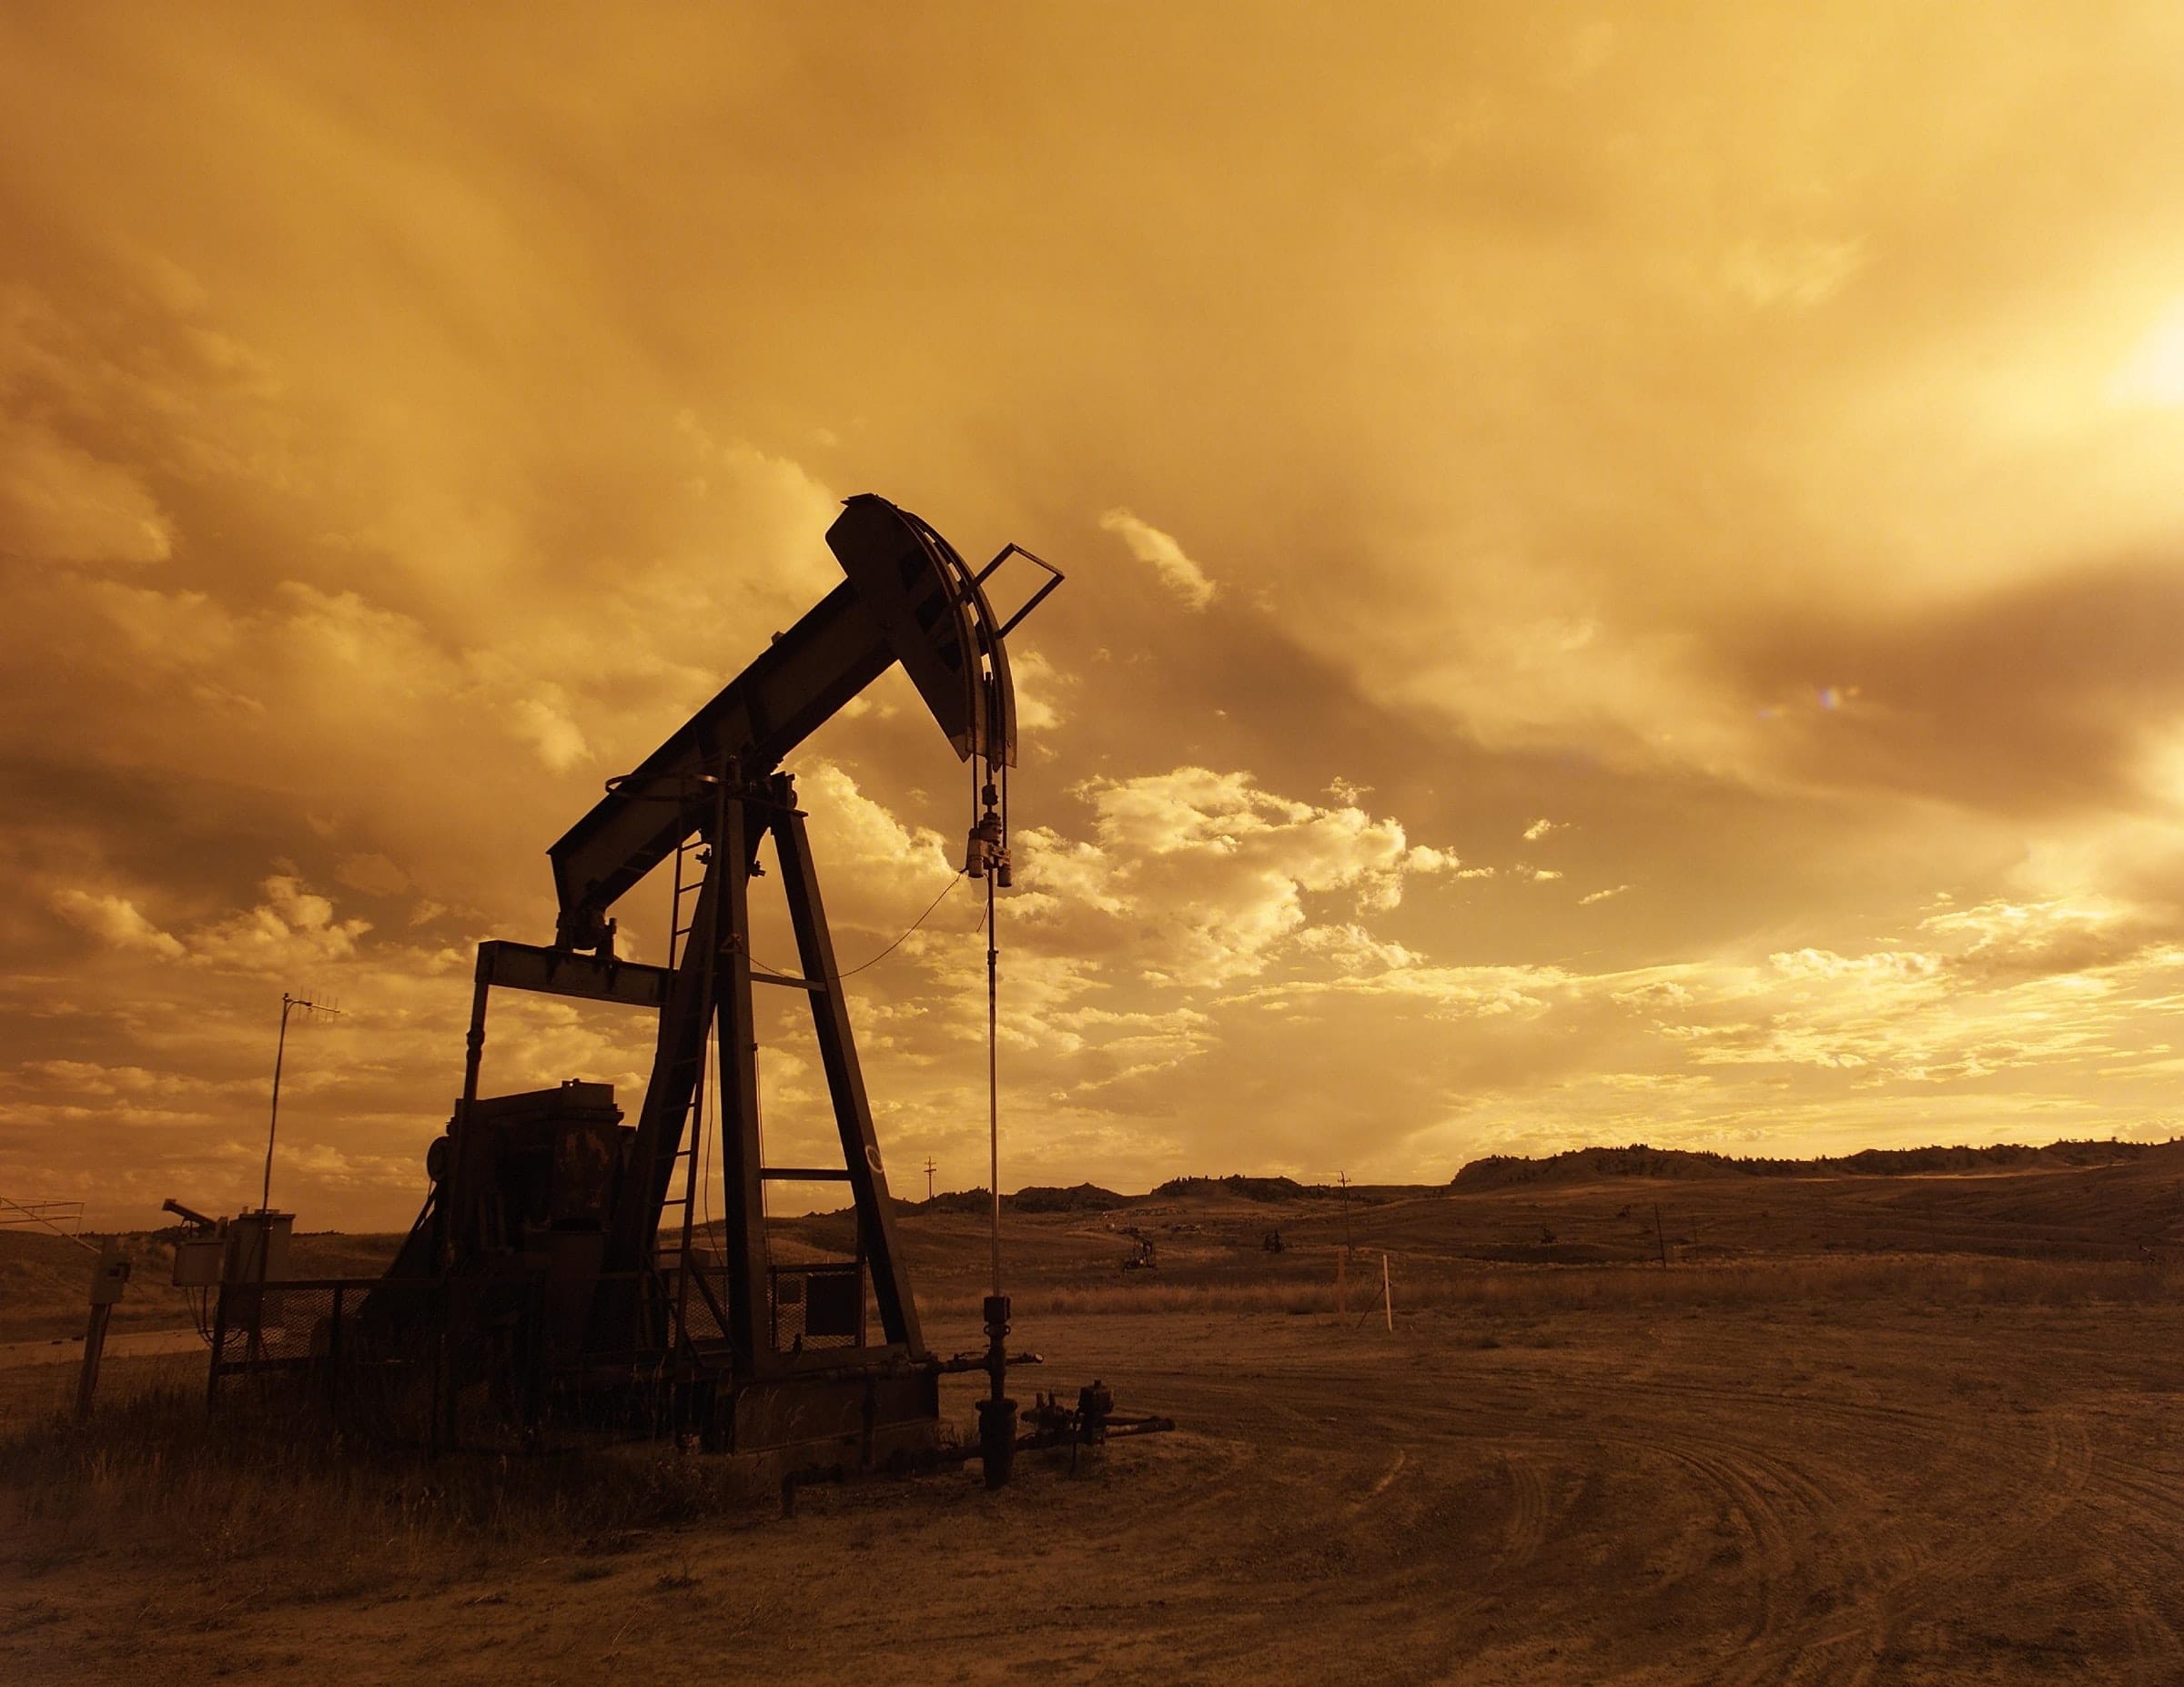 TQW - Tullow Oil Inc - Is It A Good Investment?